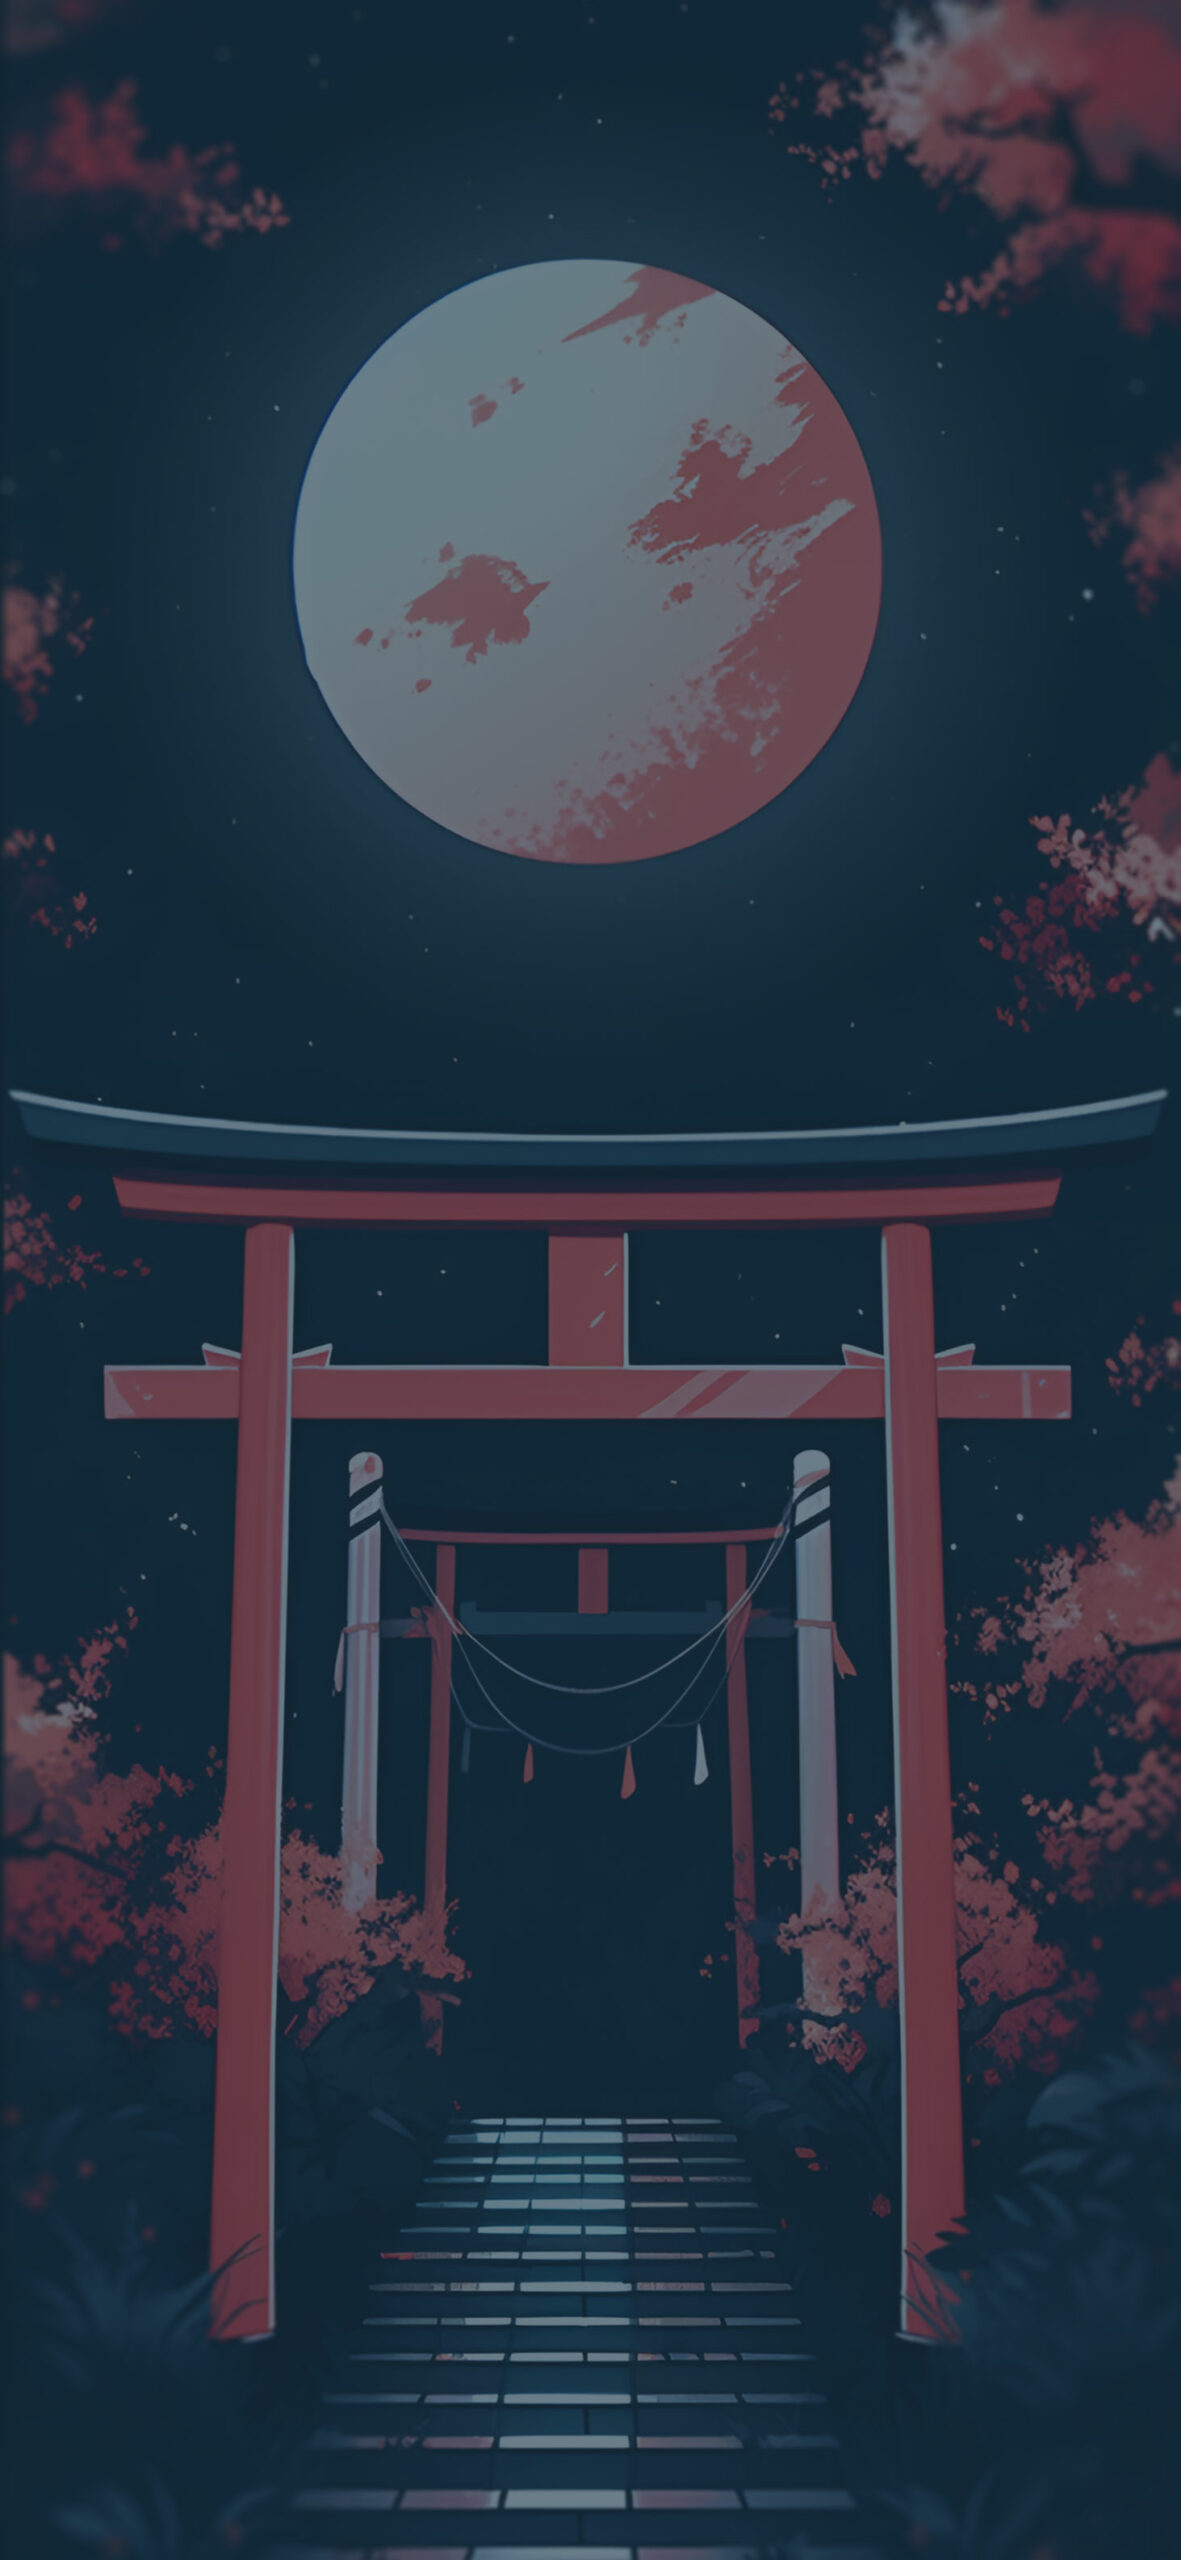 Aesthetic japanese arch & full moon wallpaper Japanese style a